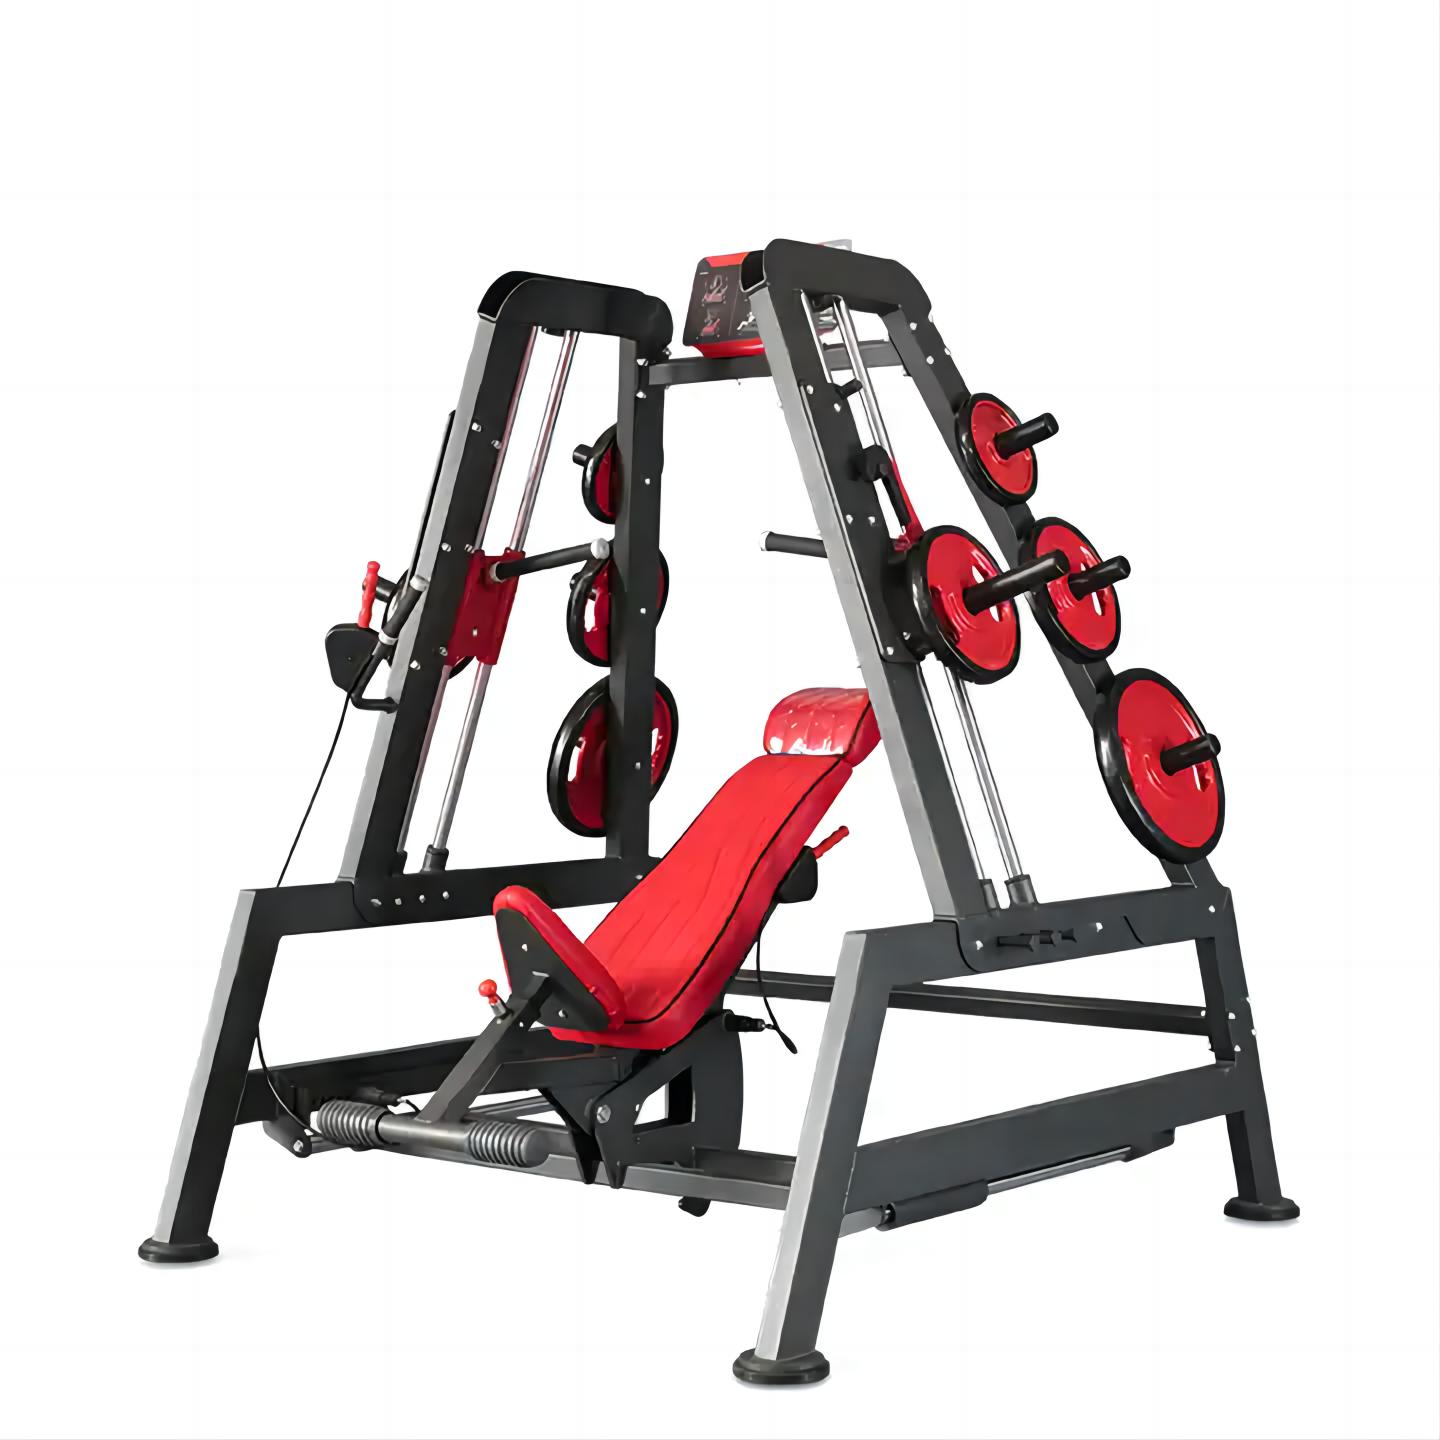 PA-02 Power Smith Machine with Dual System Upper